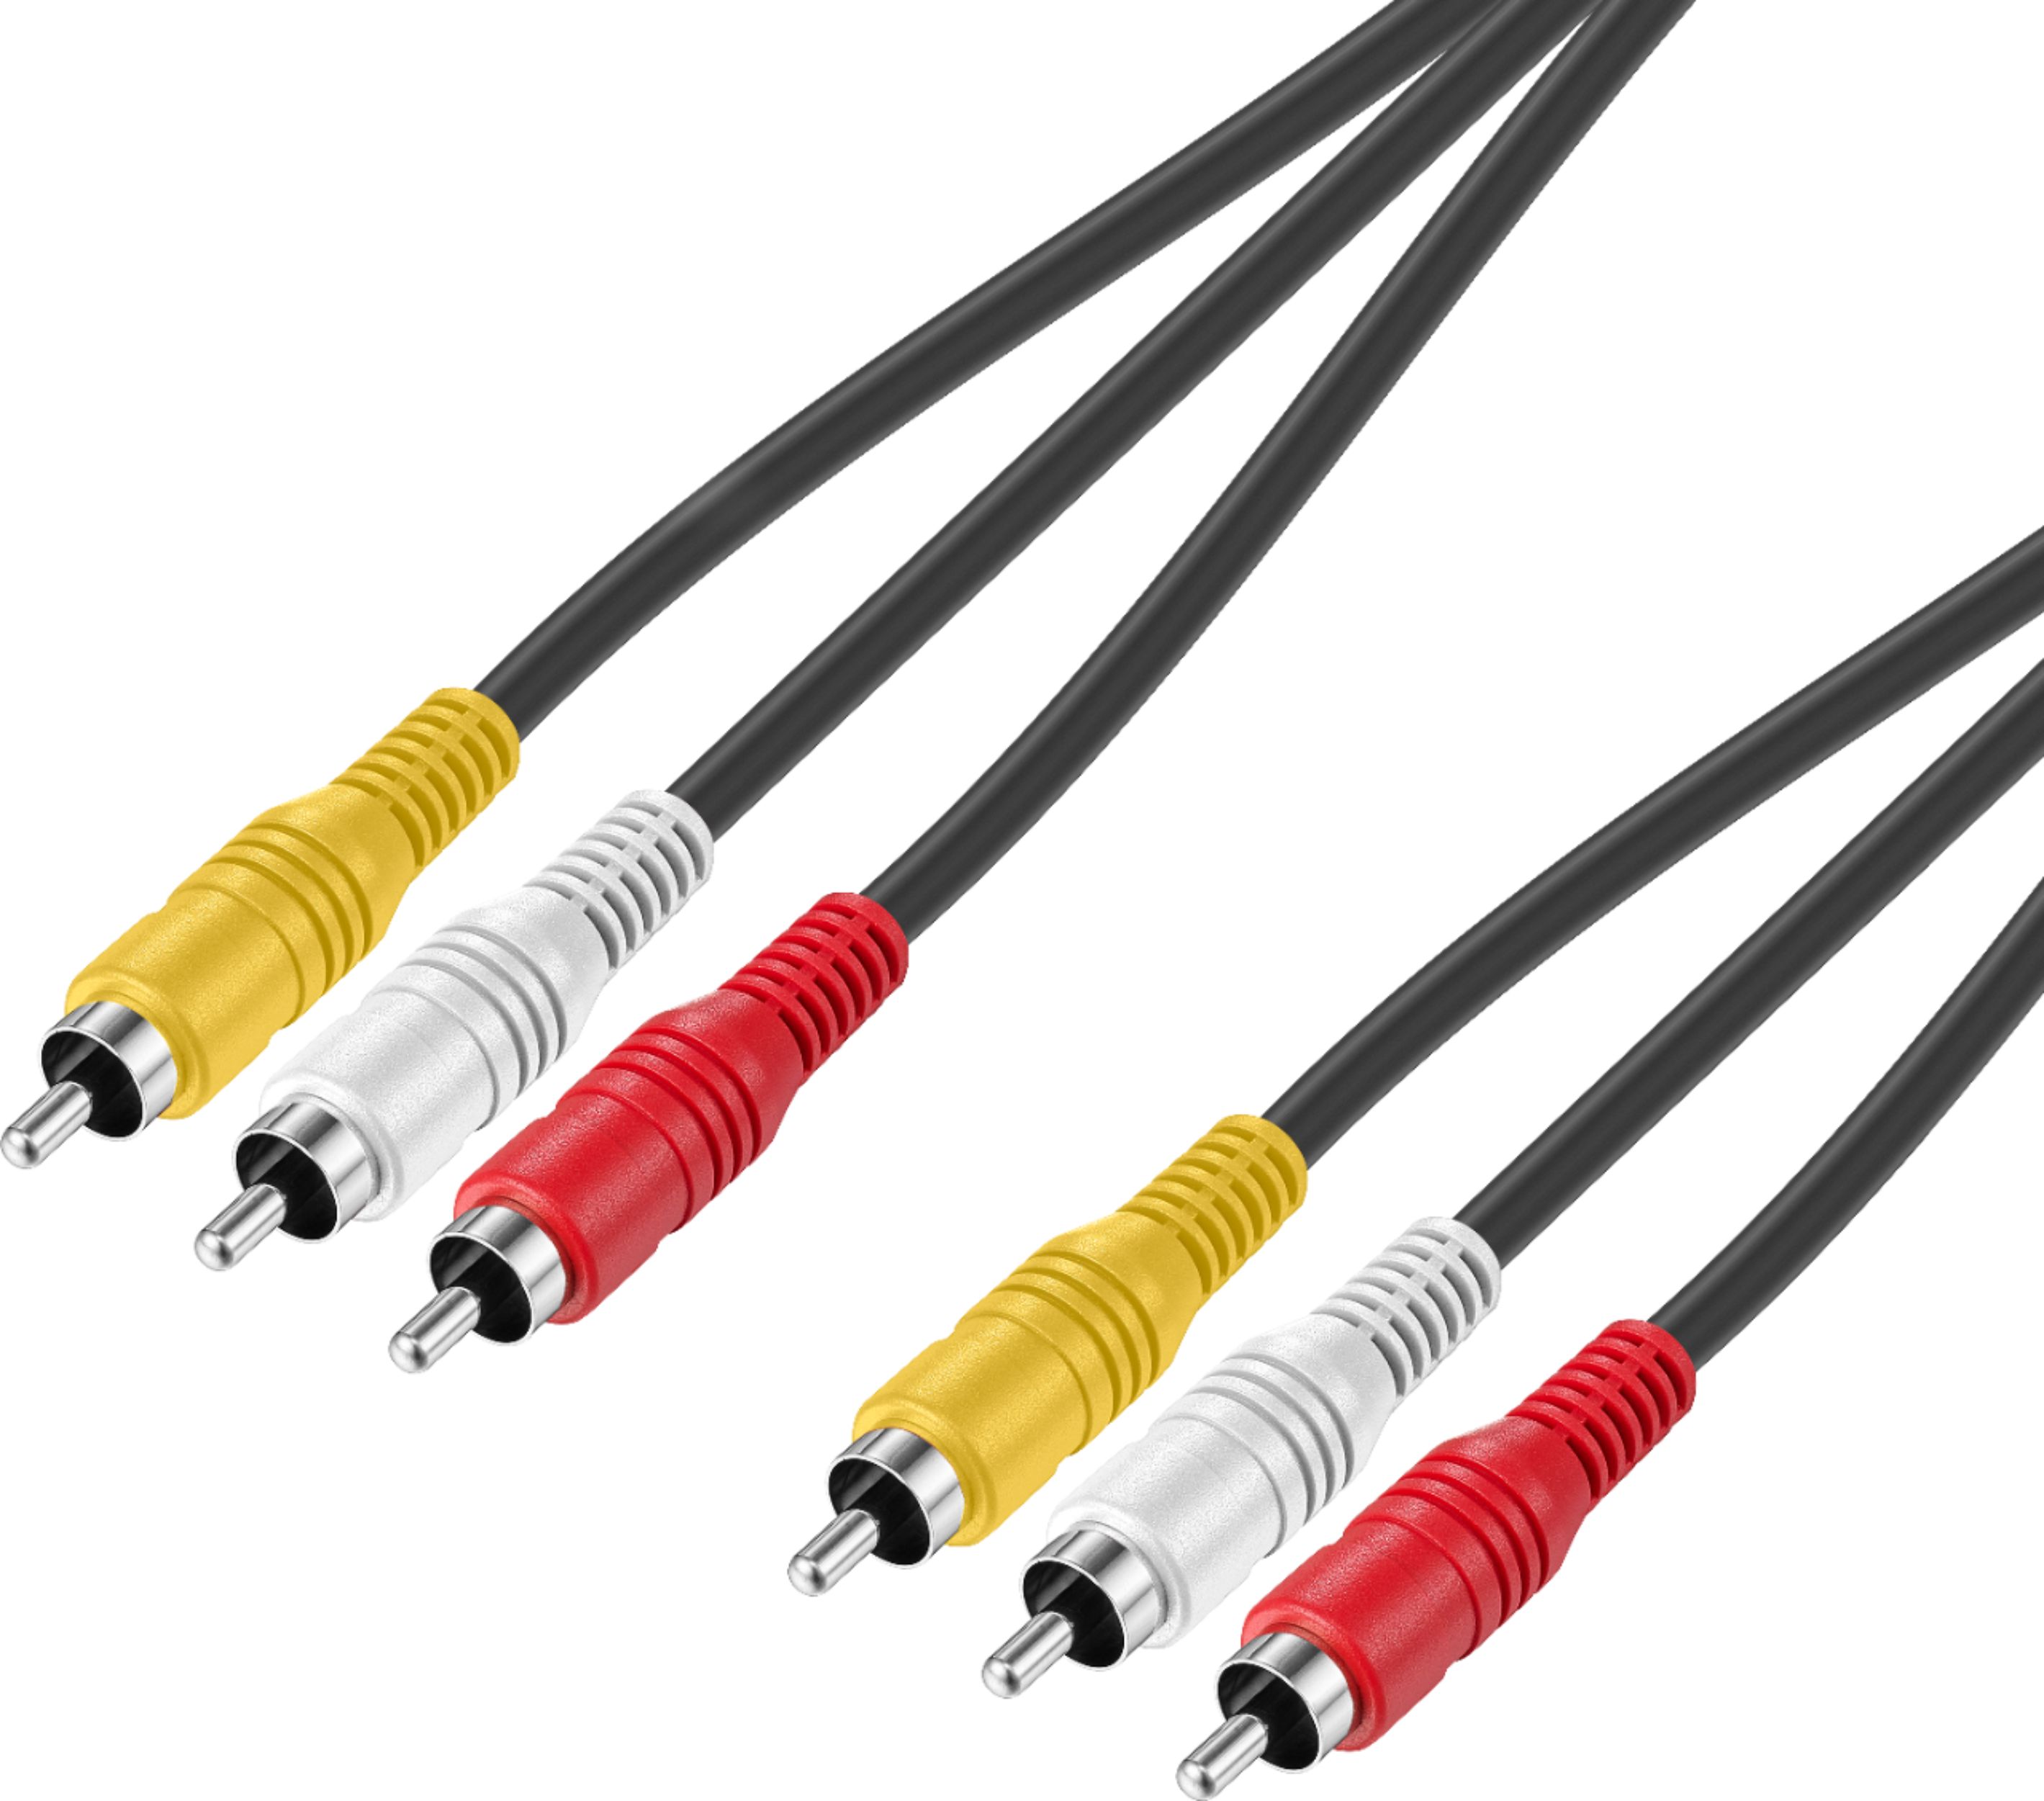  RCA Splitter, Ancable 1-Feet 3 RCA Female Jack to 6 RCA Male  Plug Composite Video AV Cables Splitter Adapter Output Cables Cord :  Electronics